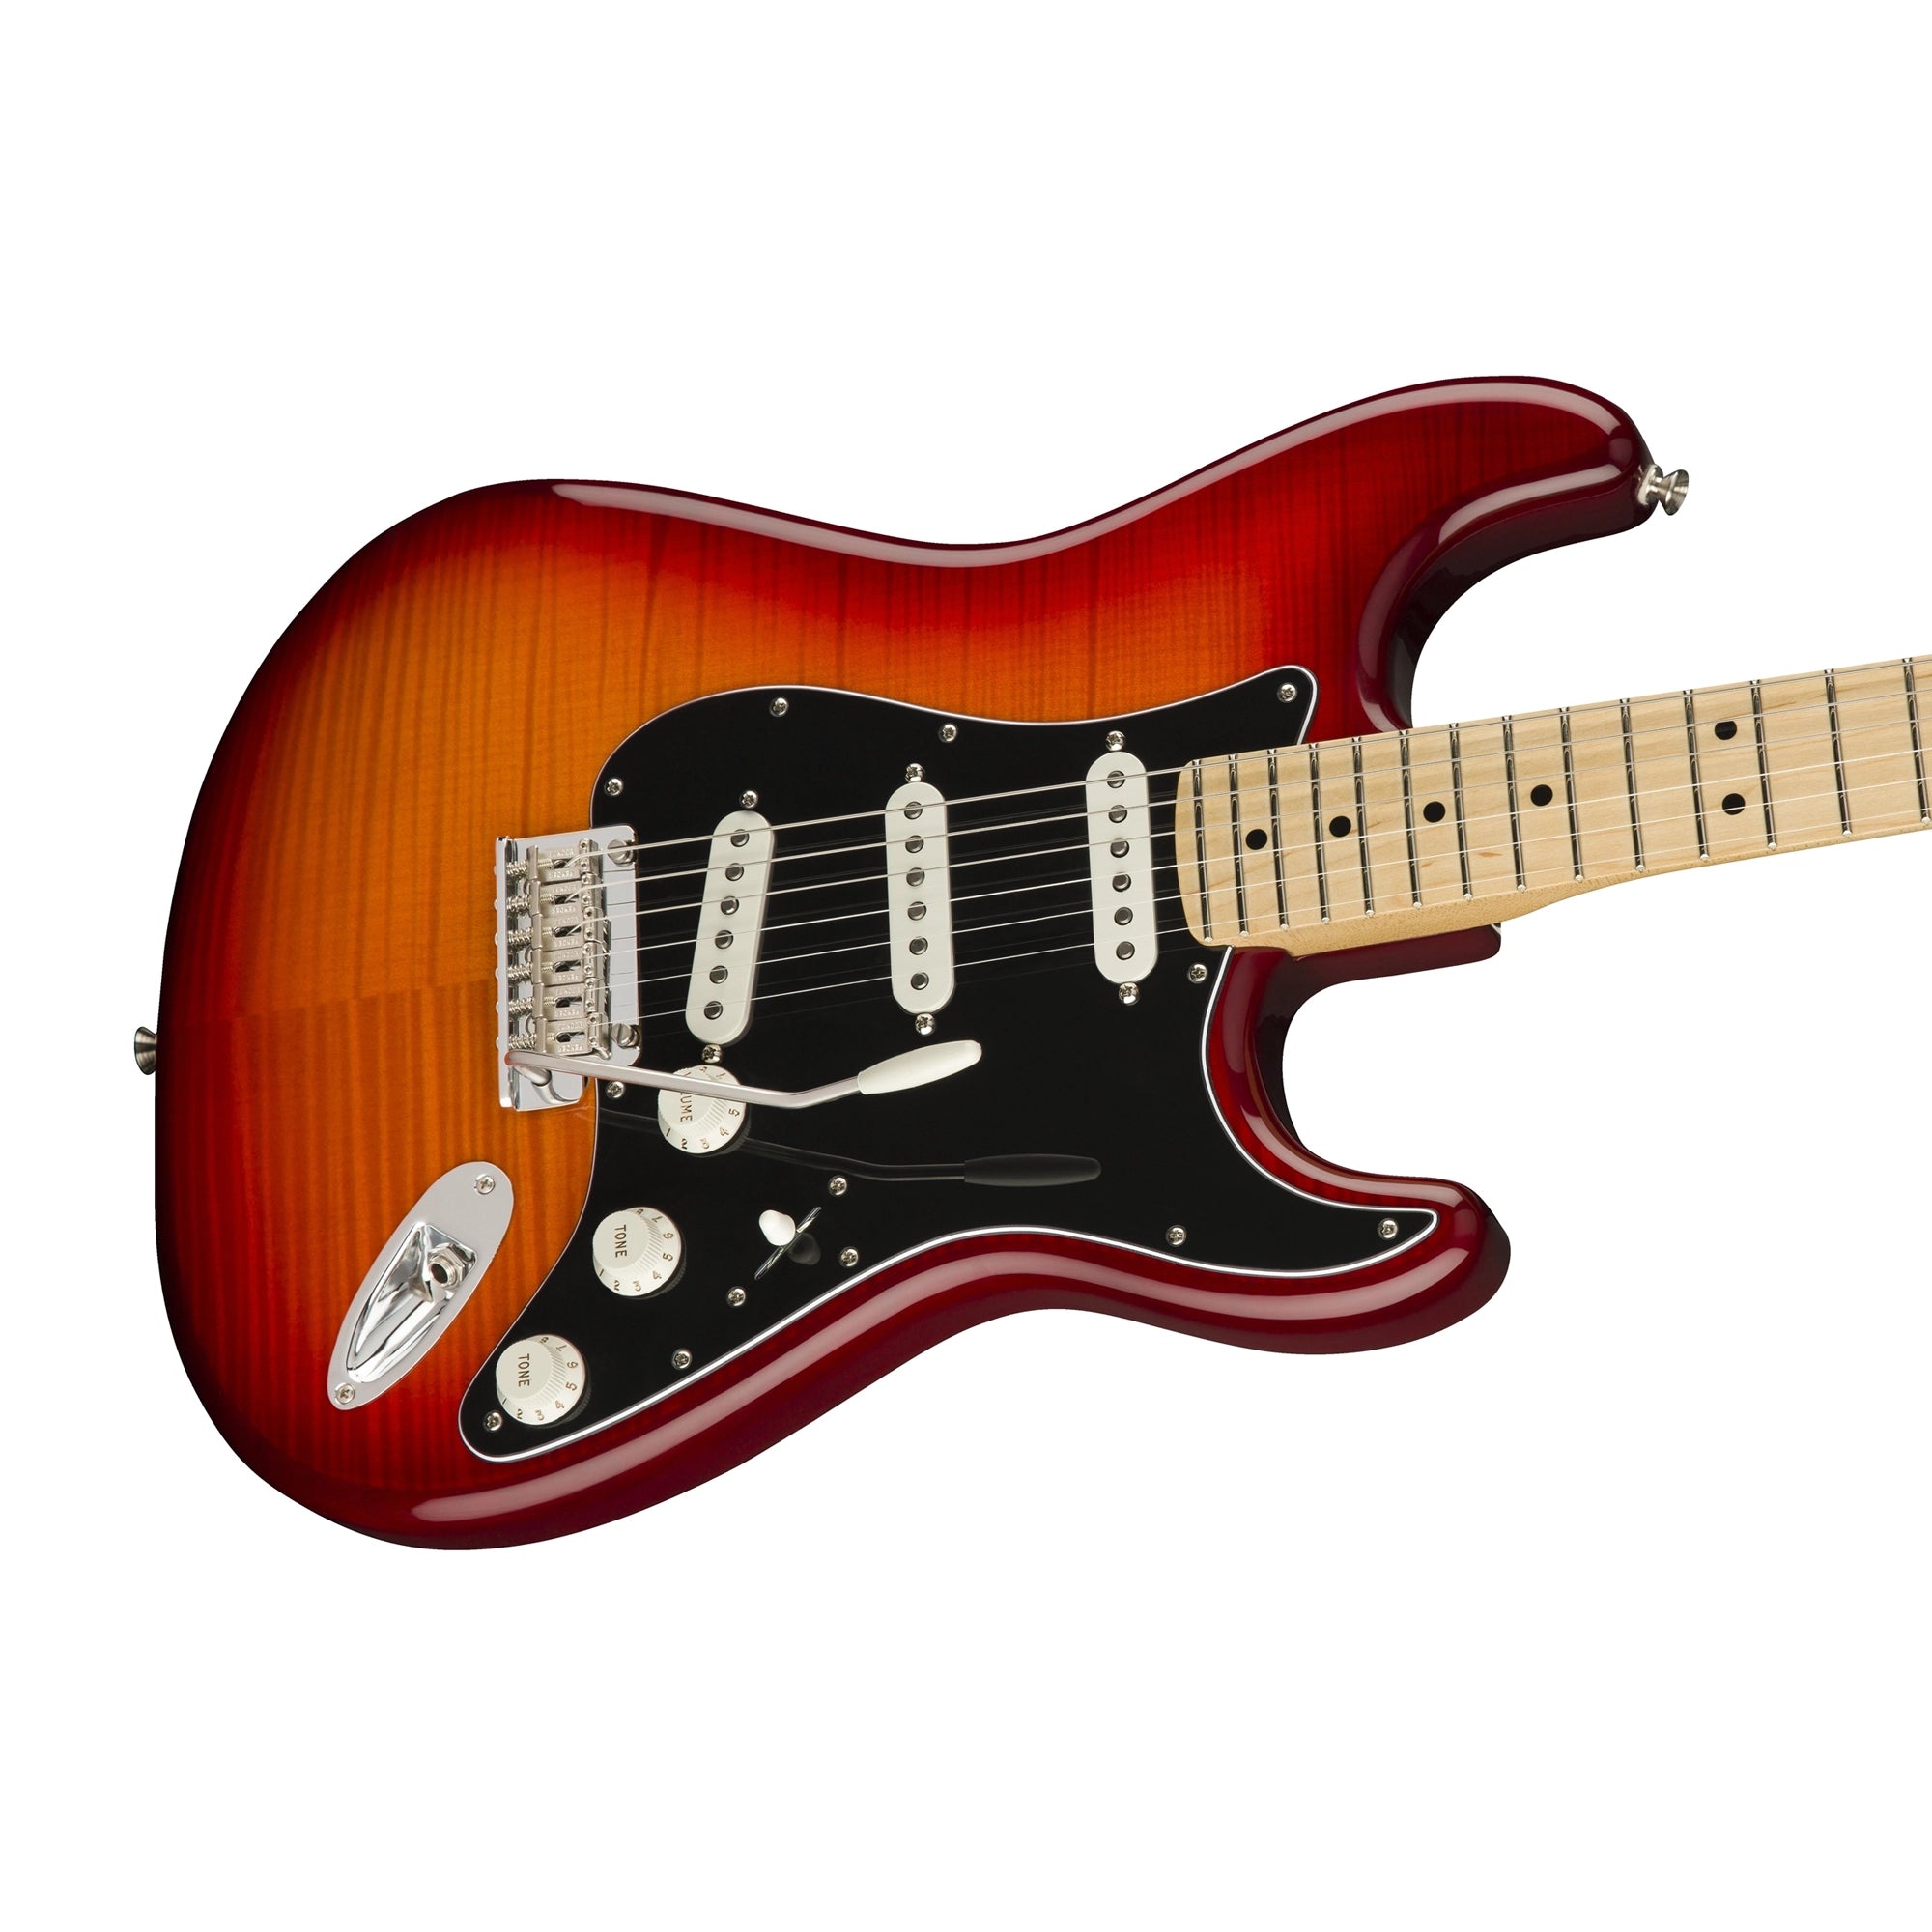 Fender Player Stratocaster Plus Top Electric Guitar - Aged Cherry